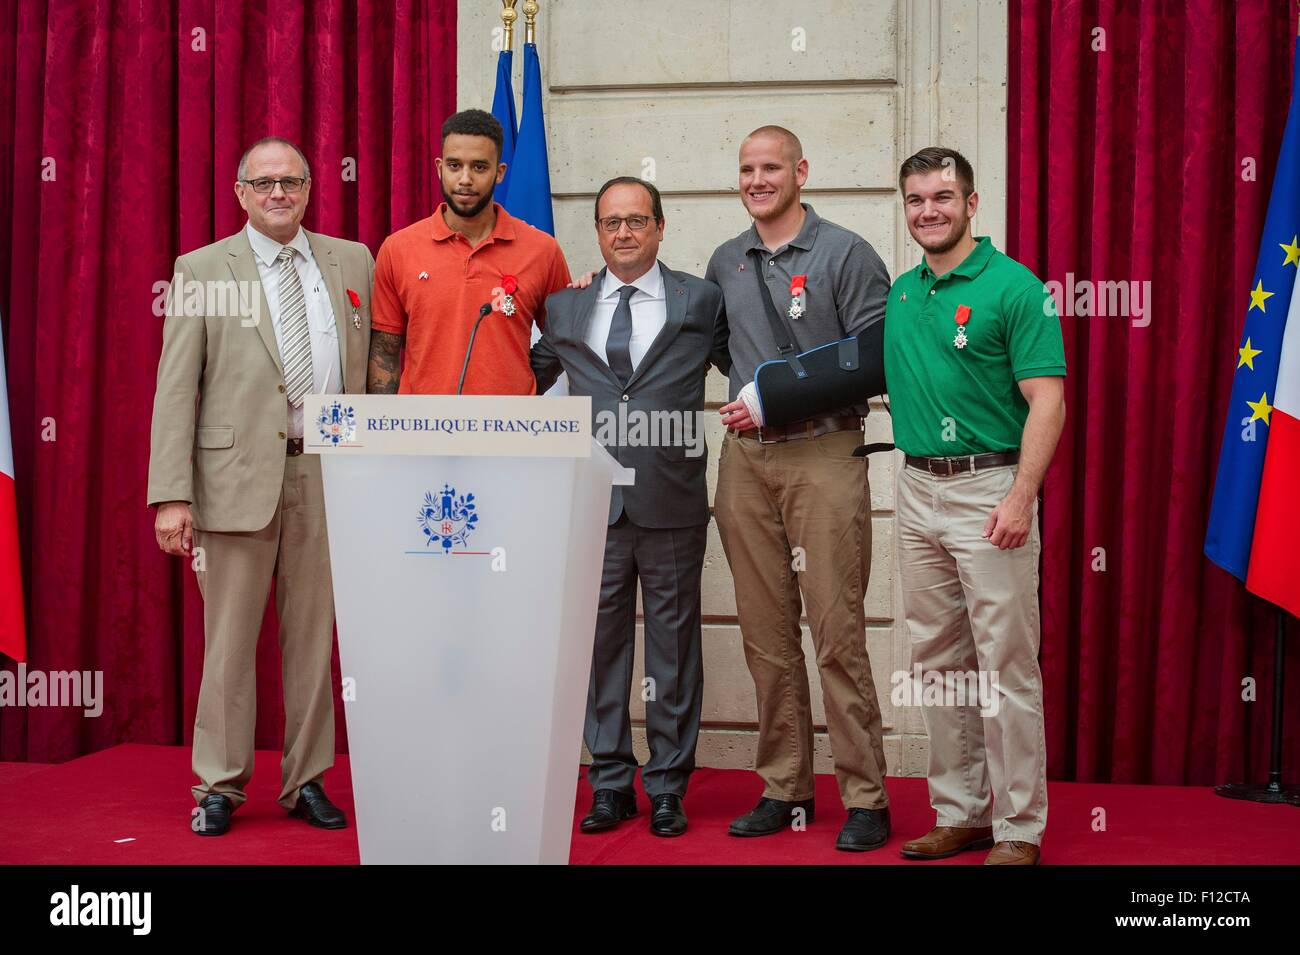 Paris, France. 24th Aug, 2015. French President Franois Hollande, center, poses with the four men who thwarted a terrorist attack on a French train after awarding the Legion of Honor at the Elysée Palace August 24, 2015 in Paris, France. (L to R): British businessman Chris Norman, Anthony Sadler Spencer Stone and Aleksander Skarlatos. Stock Photo